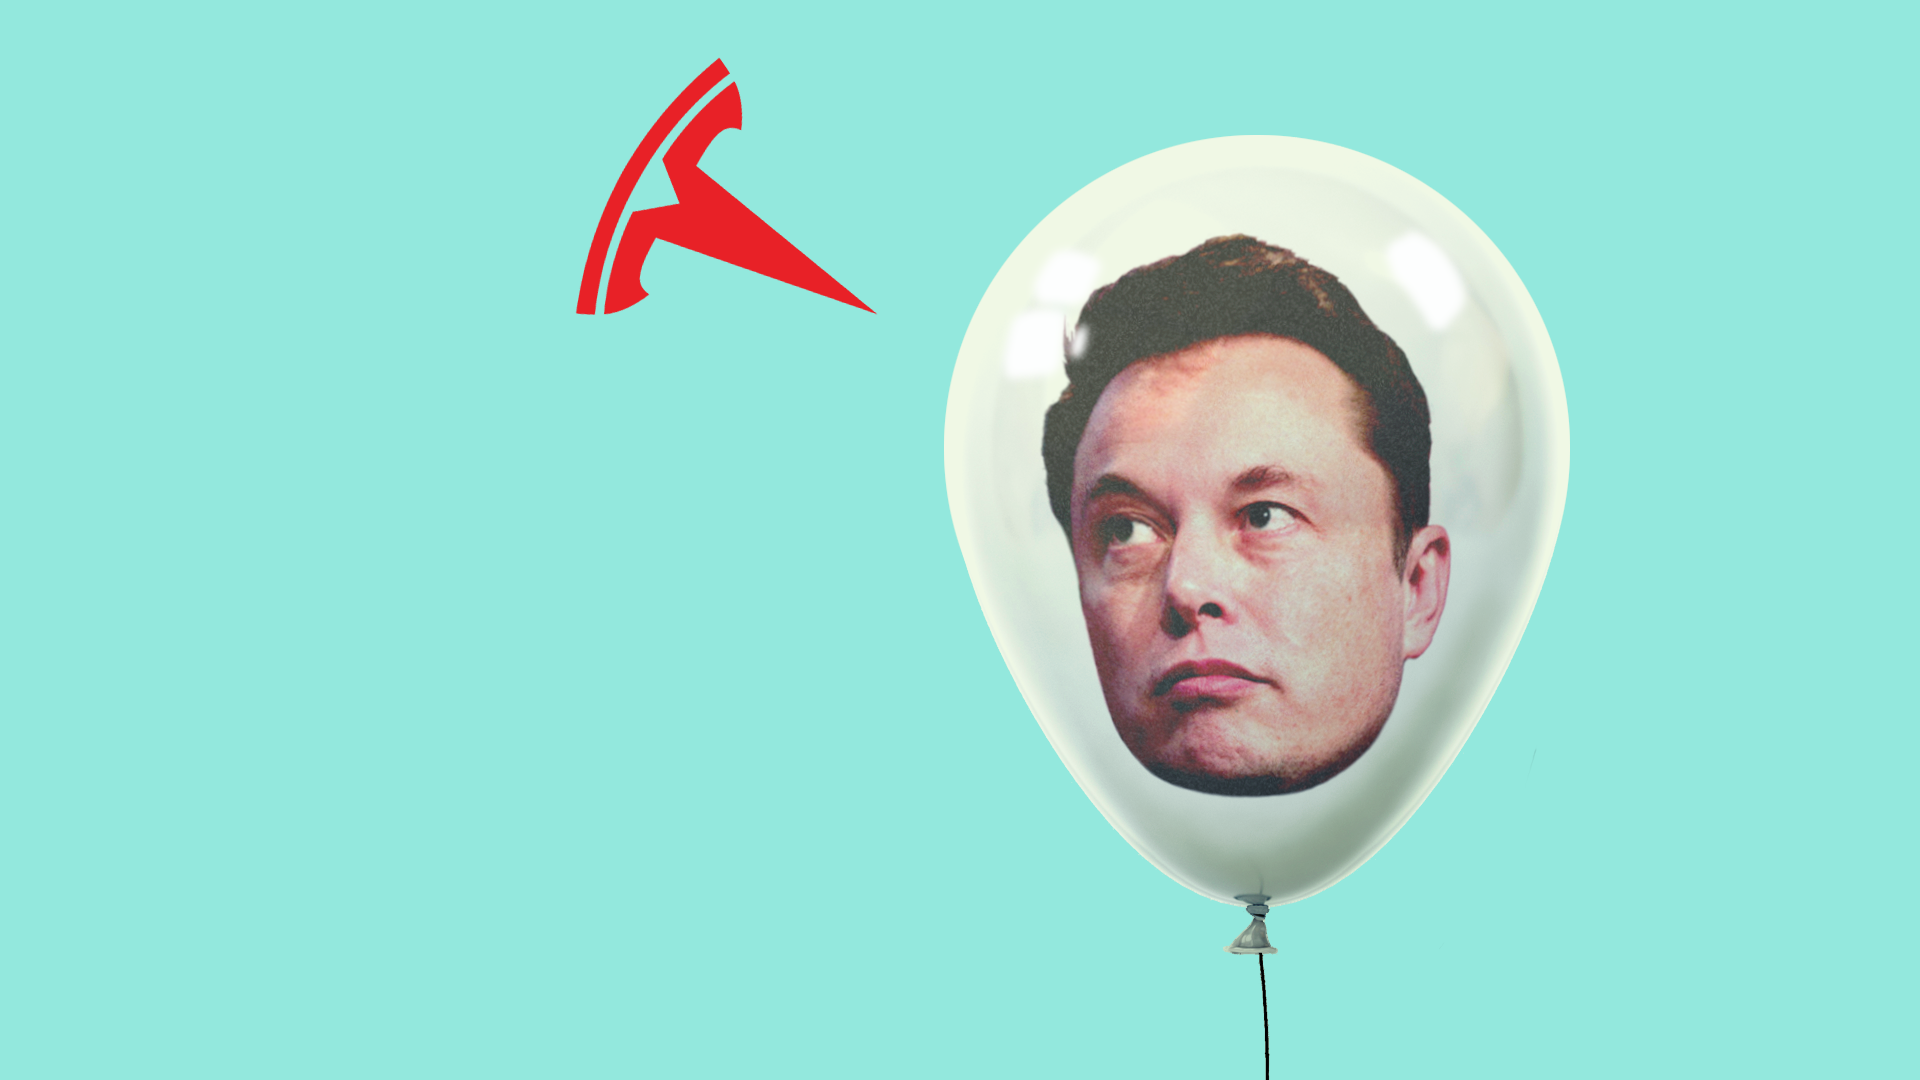 Elon Musk's head in a balloon that risks being popped by a nearby Tesla logo